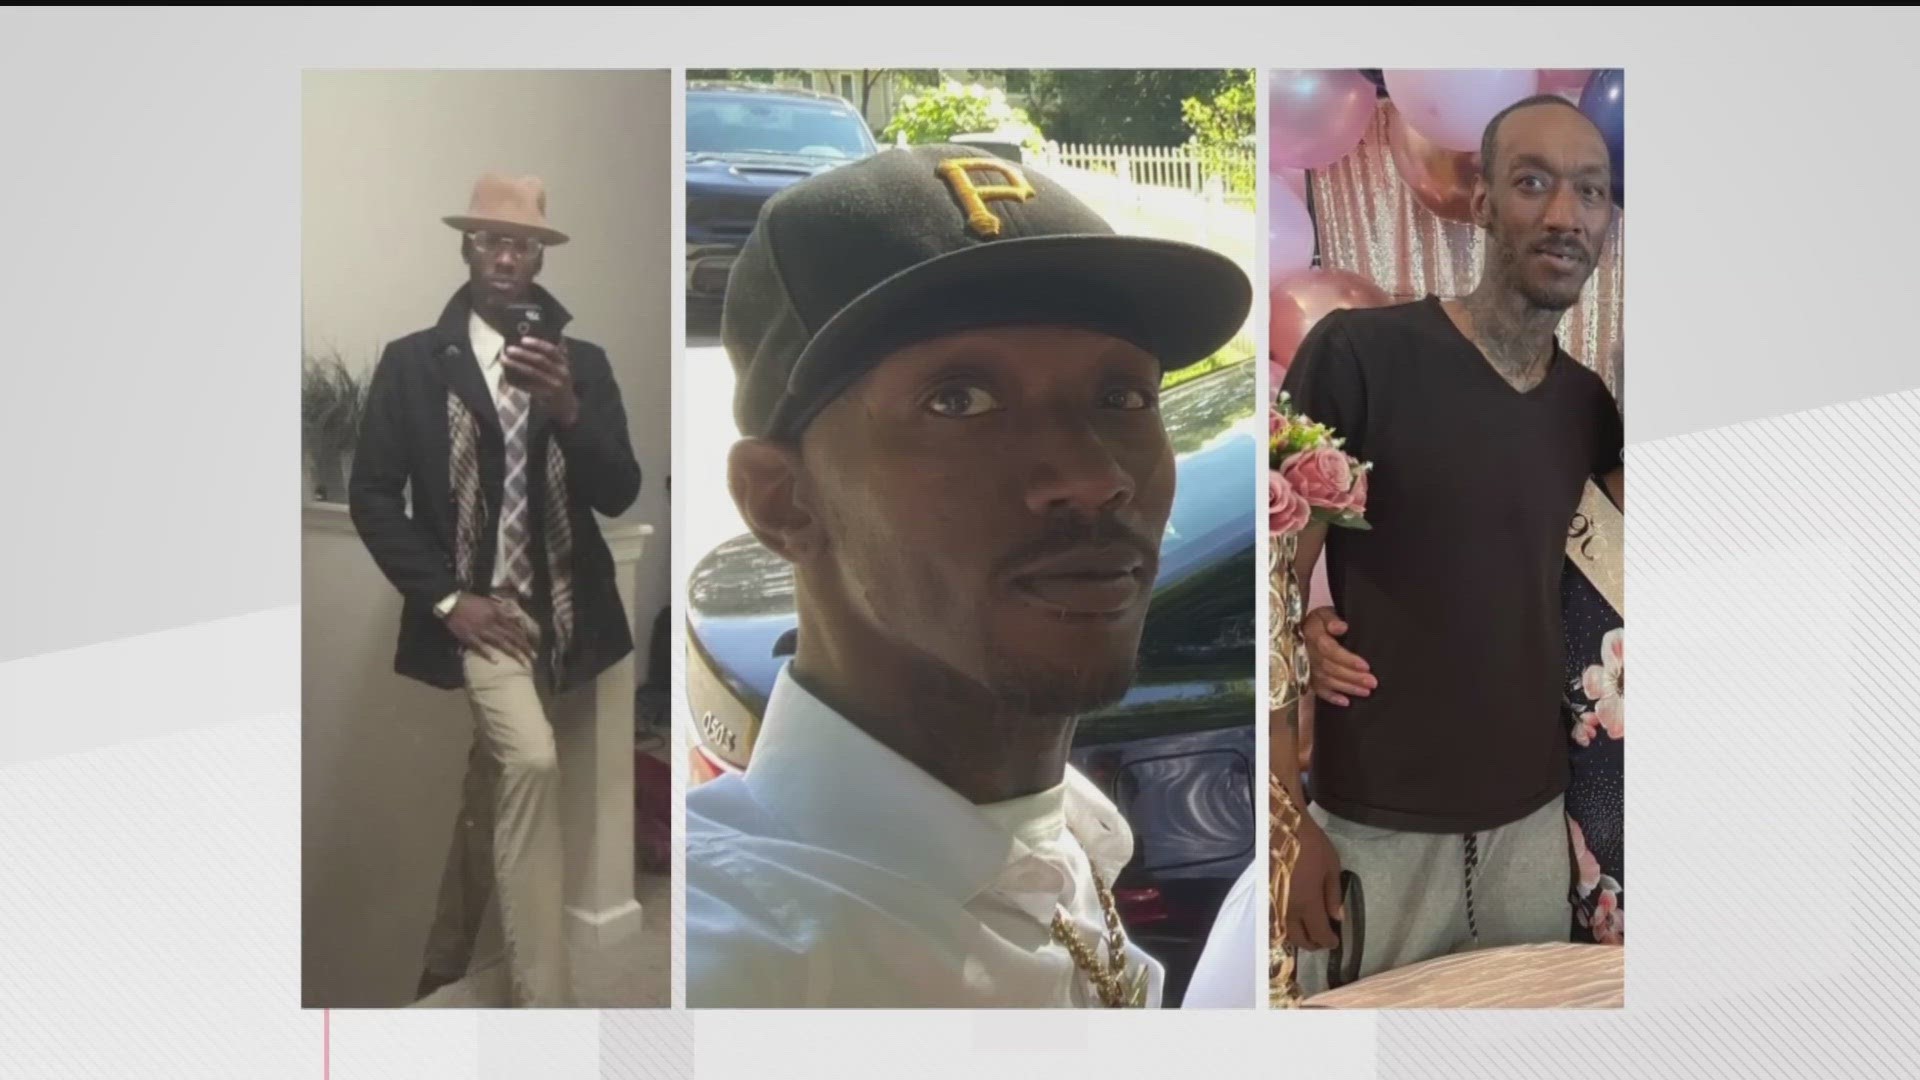 Jahmein Askew was shot and killed on Nov. 30 shortly before 1 a.m. at the Bear Creek Senior Village Community in the City of Lovejoy, authorities said.